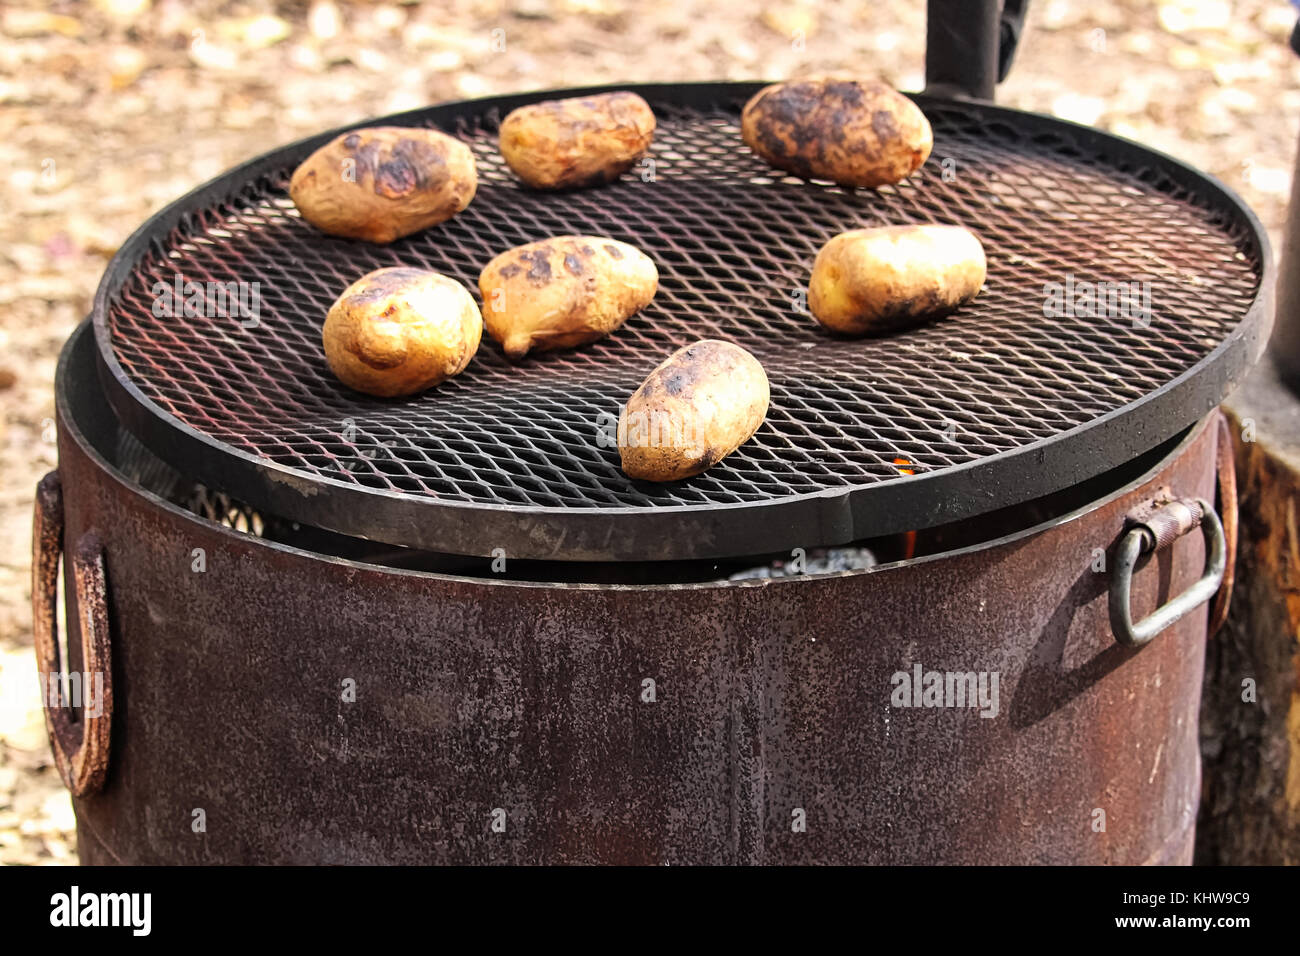 https://c8.alamy.com/comp/KHW9C9/making-baked-potatoes-on-a-campfire-grill-KHW9C9.jpg